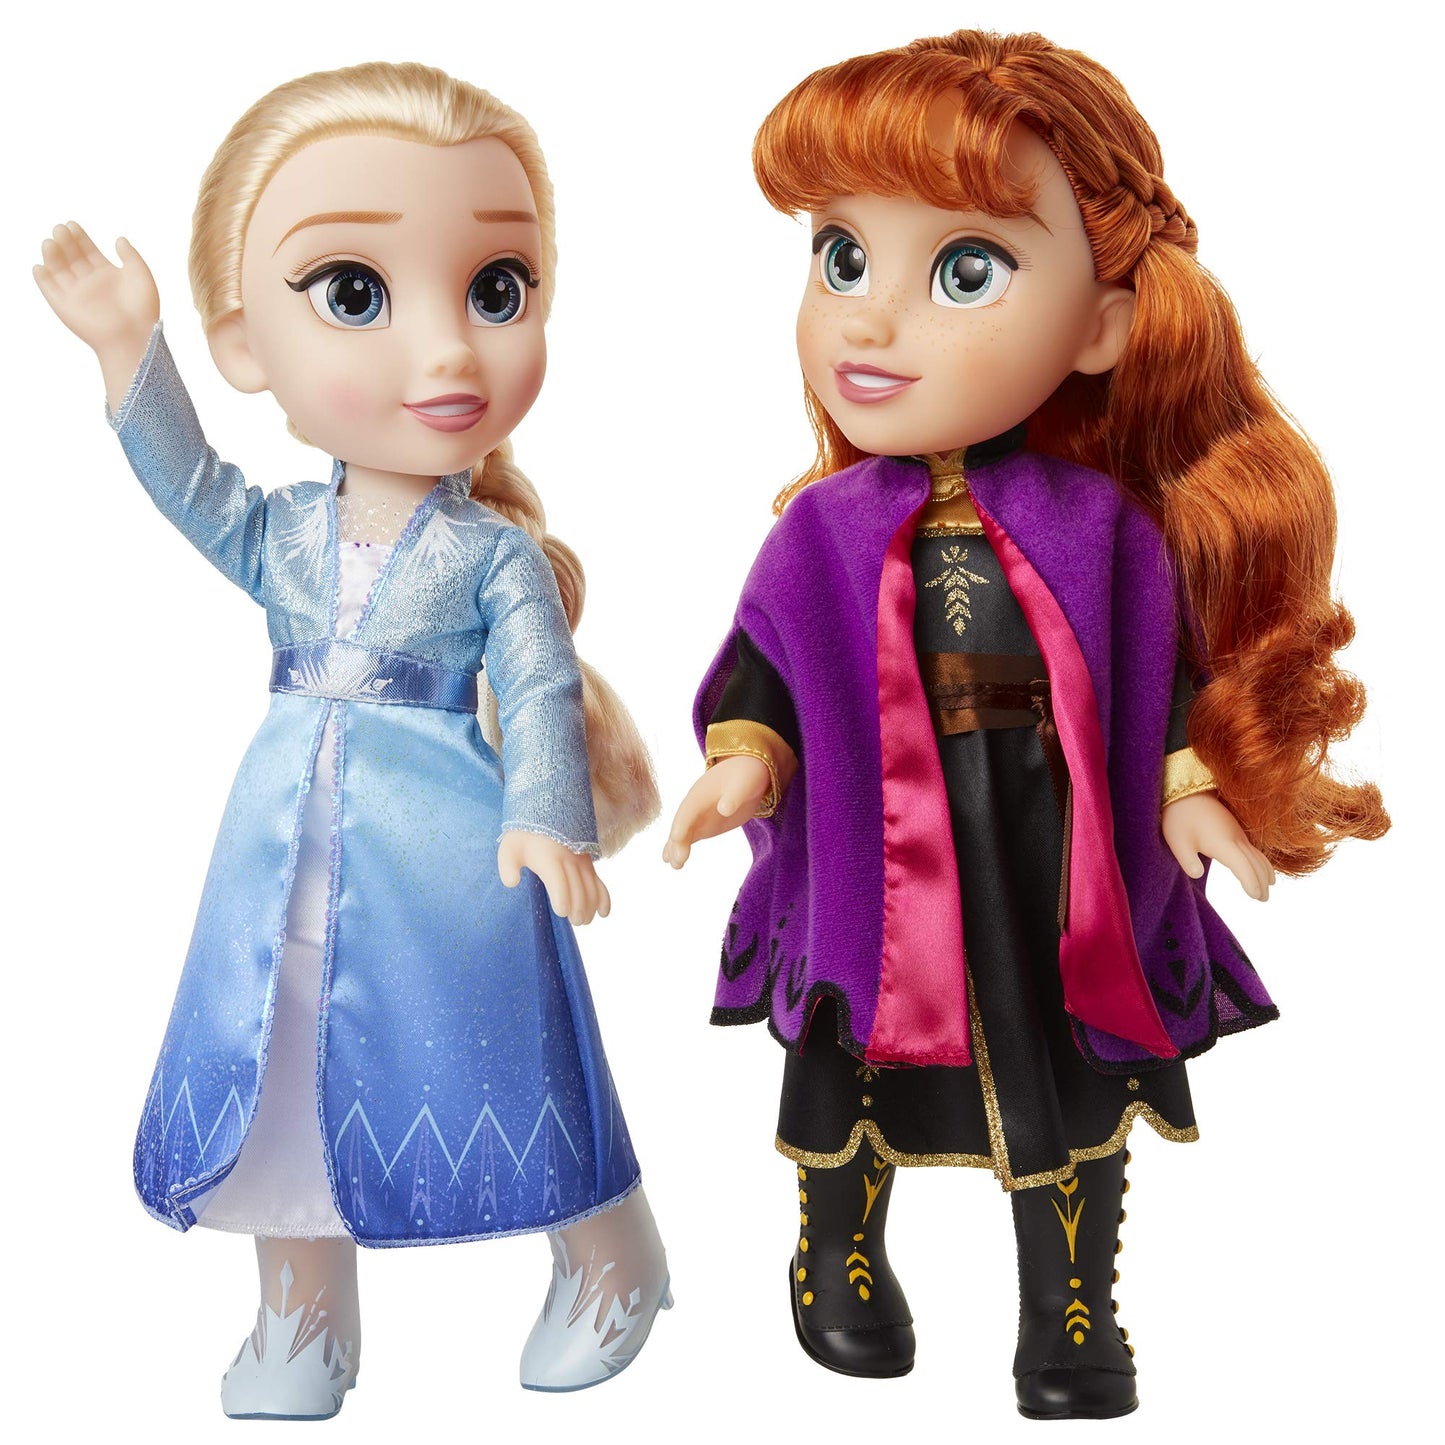 Disney Frozen 2 Singing Sisters Anna & Elsa Exclusive 14-Inch Doll 2-Pack [with Sound]